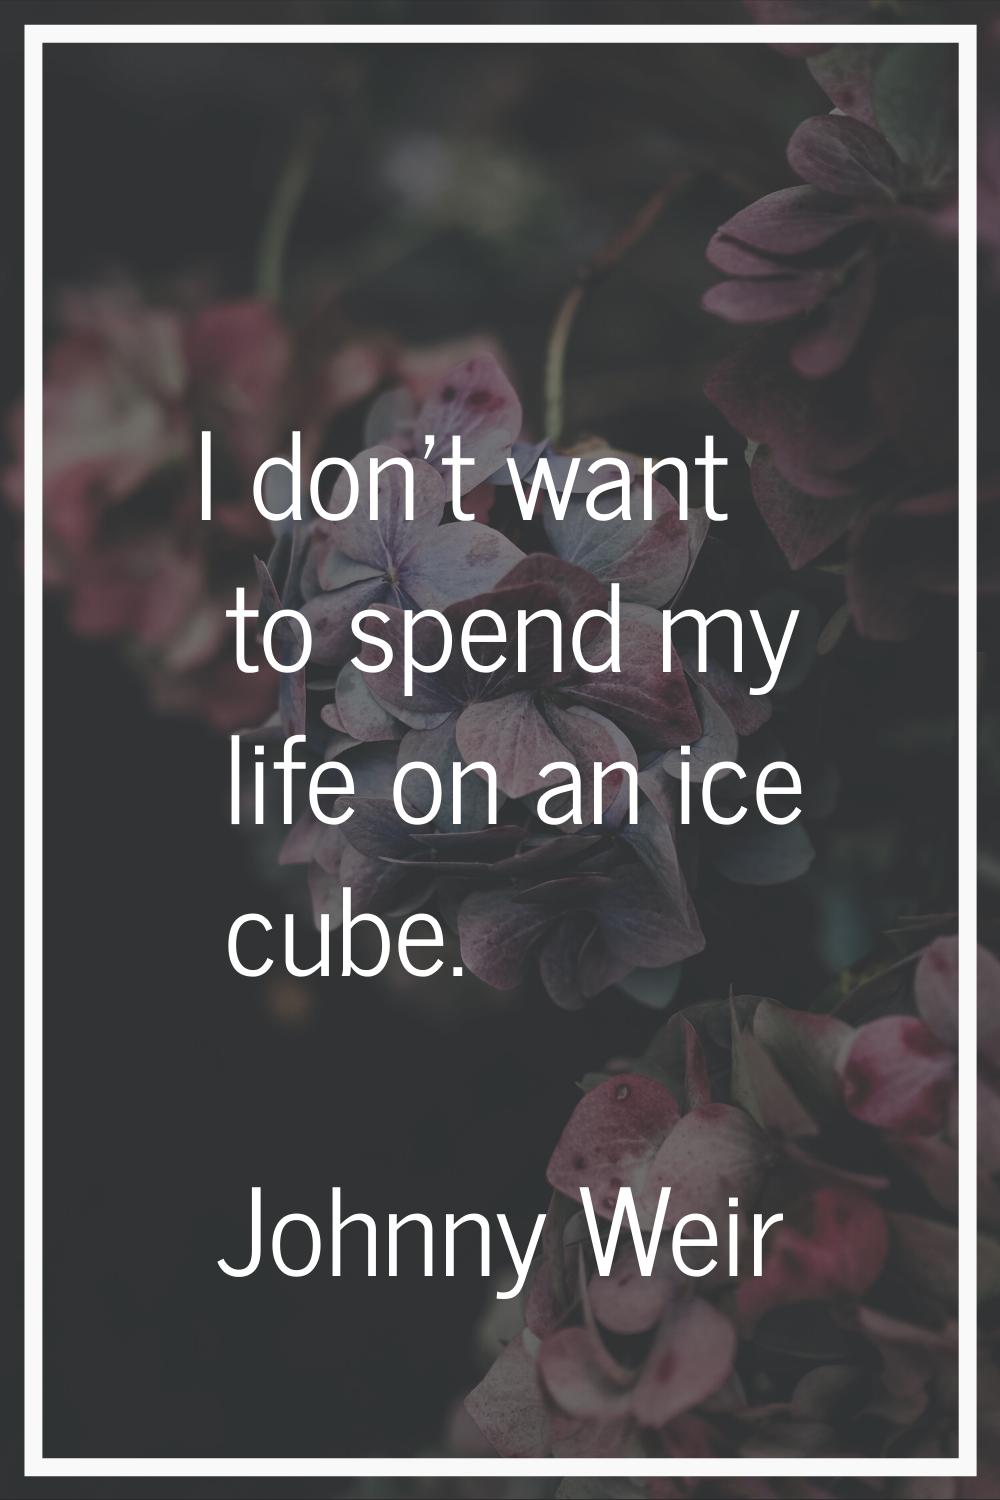 I don't want to spend my life on an ice cube.